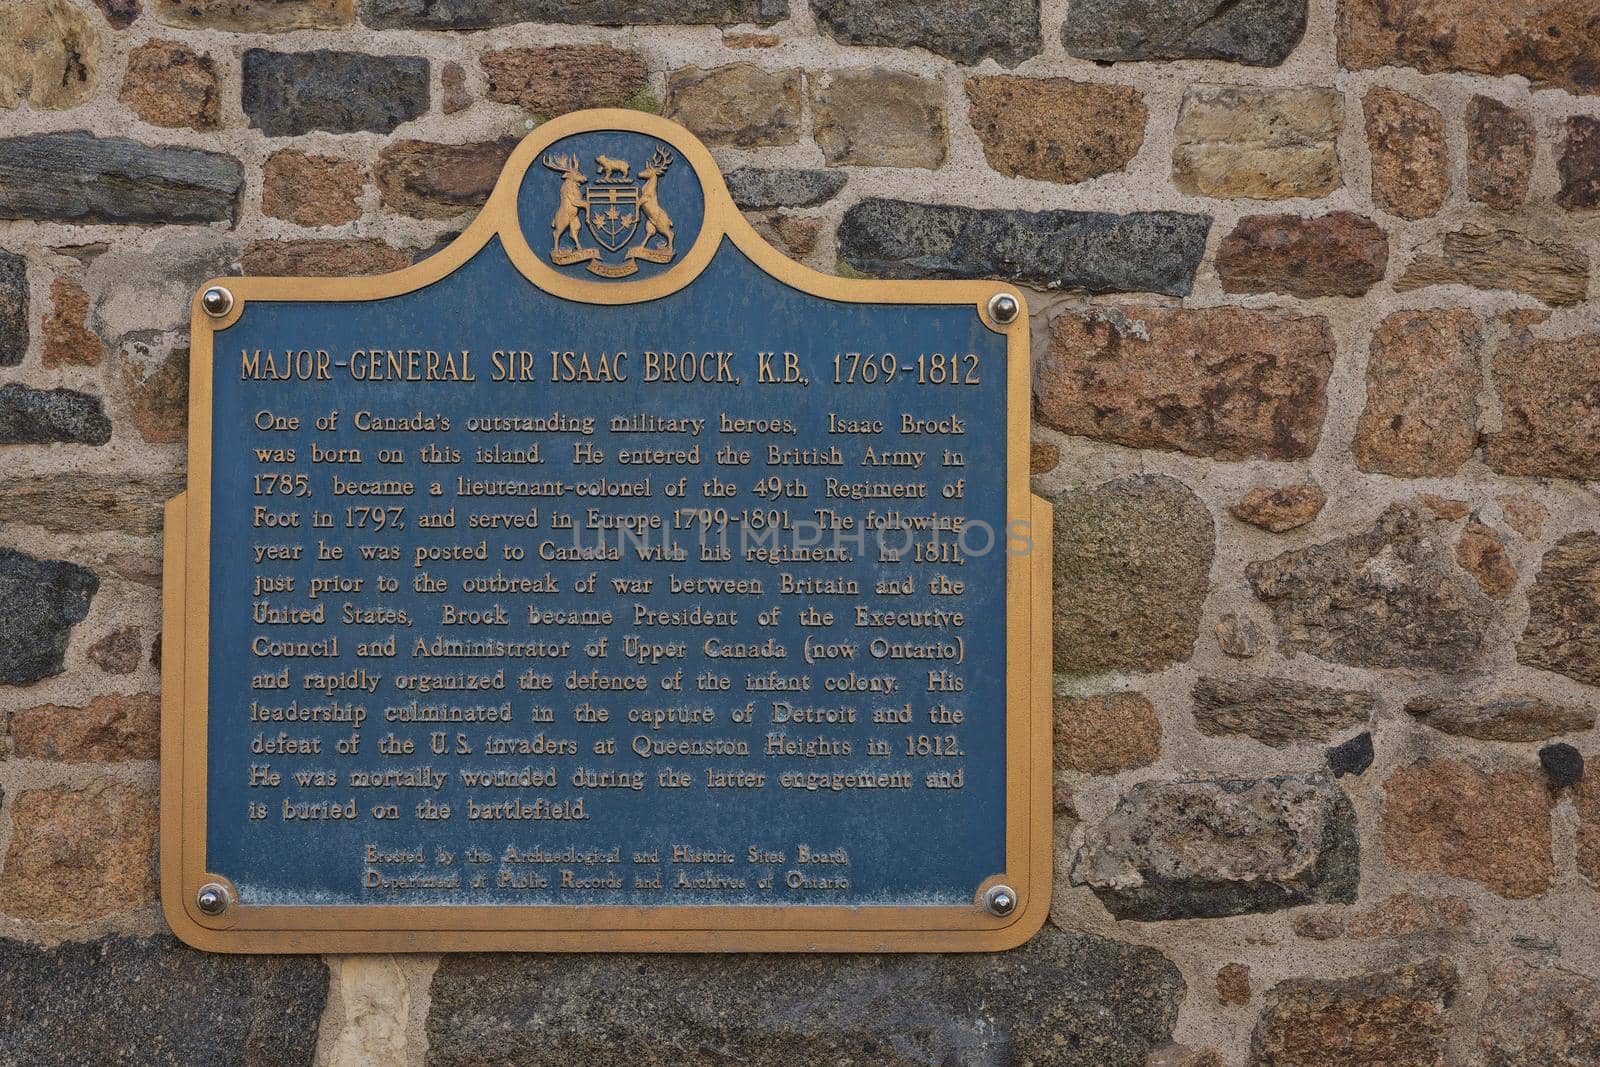 ST. PETER PORT, GUERNSEY, CHANNEL ISLANDS - AUGUST 16, 2017: Dedication to Major-General Isaac Brock commemorating his life as a local resident ofmSt. Peter Port in Guernsey.